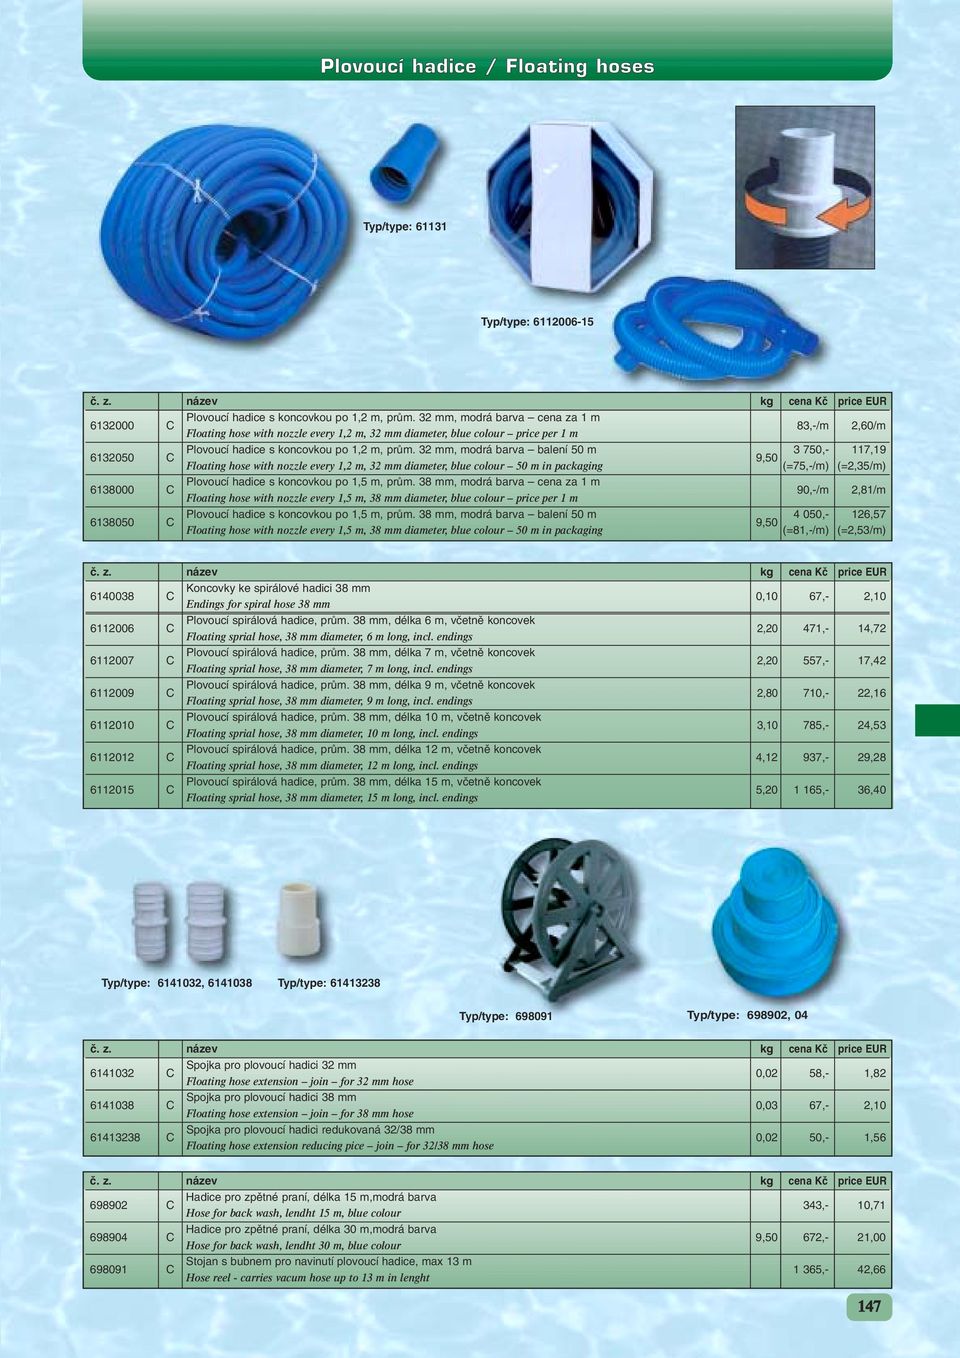 32 mm, modrá barva balení 50 m 3 750,- 117,19 9,50 Floating hose with nozzle every 1,2 m, 32 mm diameter, blue colour 50 m in packaging (=75,-/m) (=2,35/m) 6138000 C Plovoucí hadice s koncovkou po